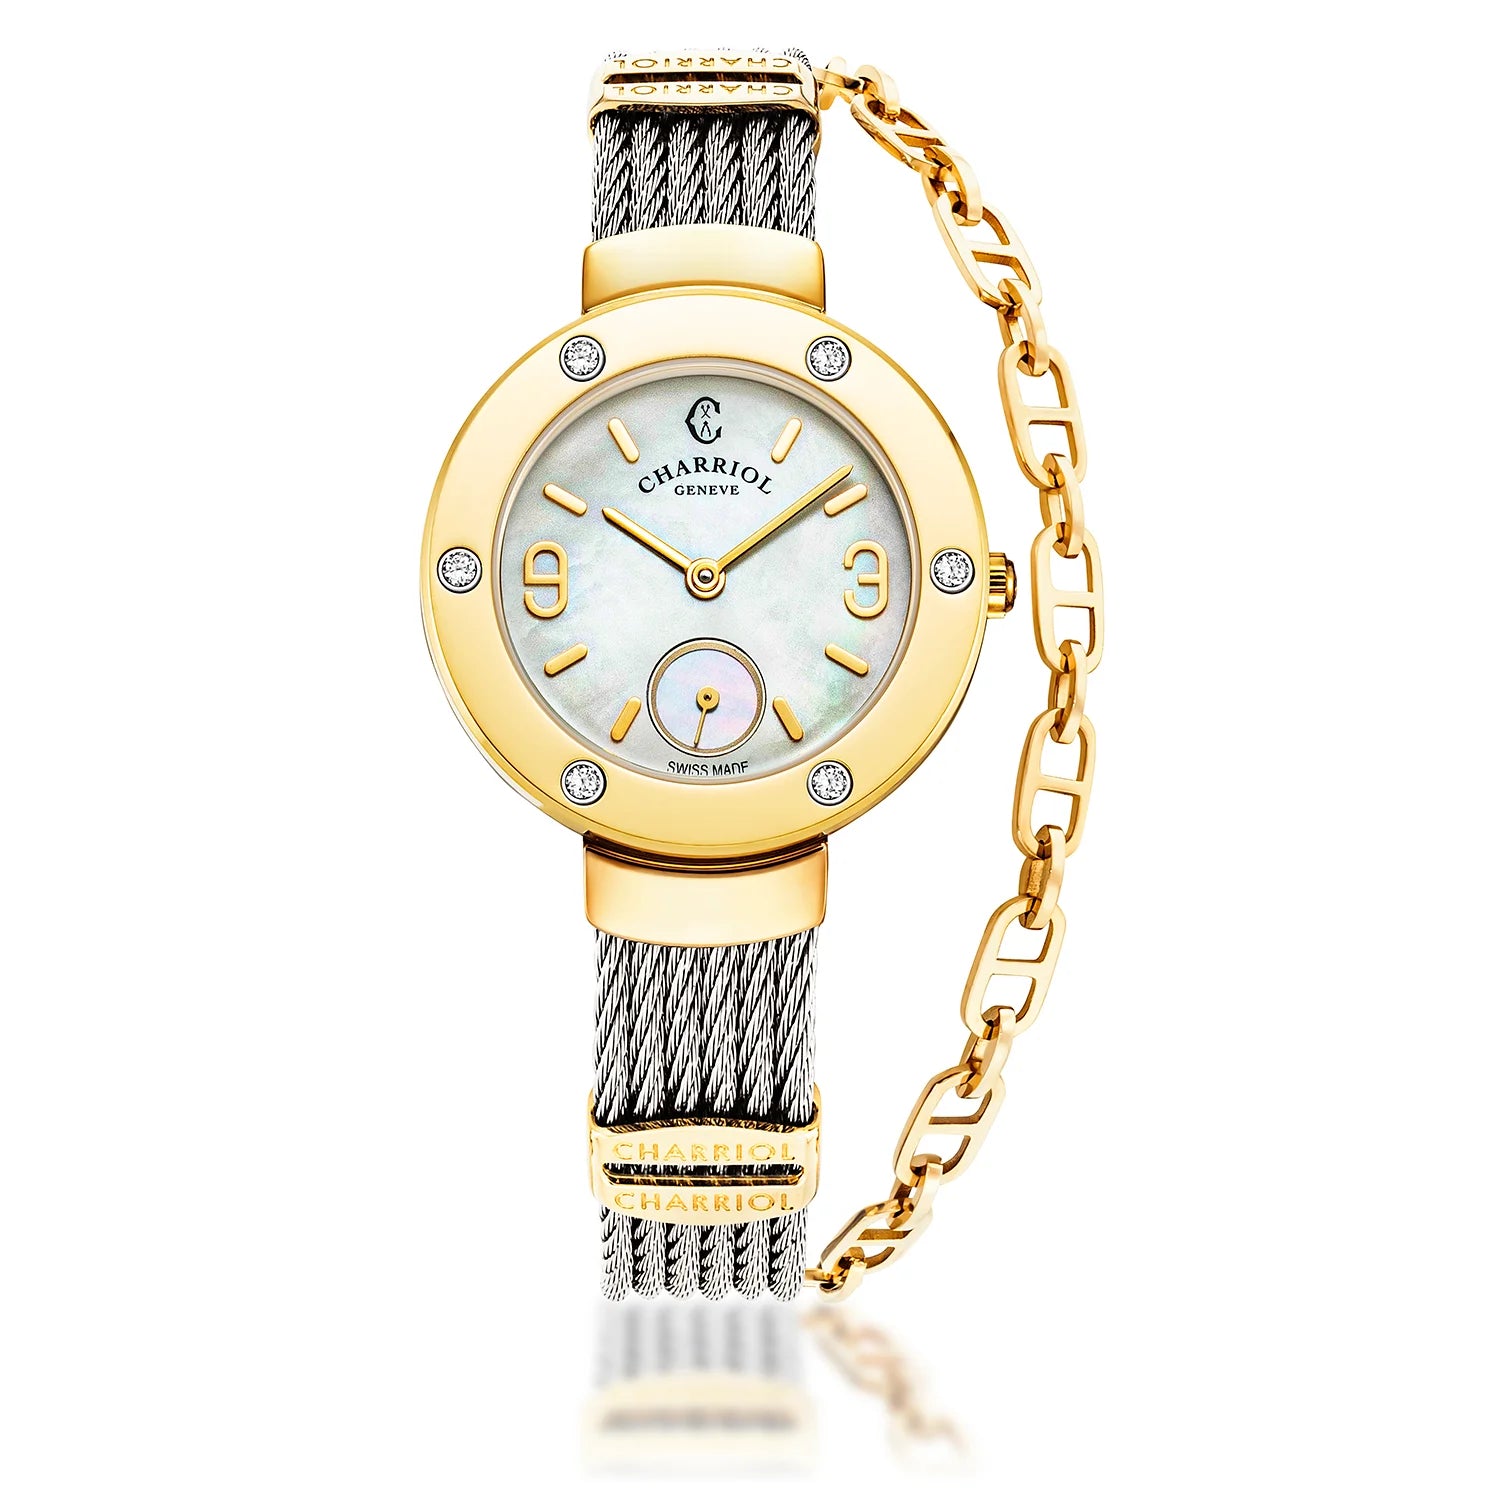 ST TROPEZ, 30MM, QUARTZ CALIBRE, MOTHER-OF-PEARL DIAL, YELLOW GOLD PVD WITH 6 DIAMONDS BEZEL, STEEL CABLE BRACELET - Charriol Geneve -  Watch